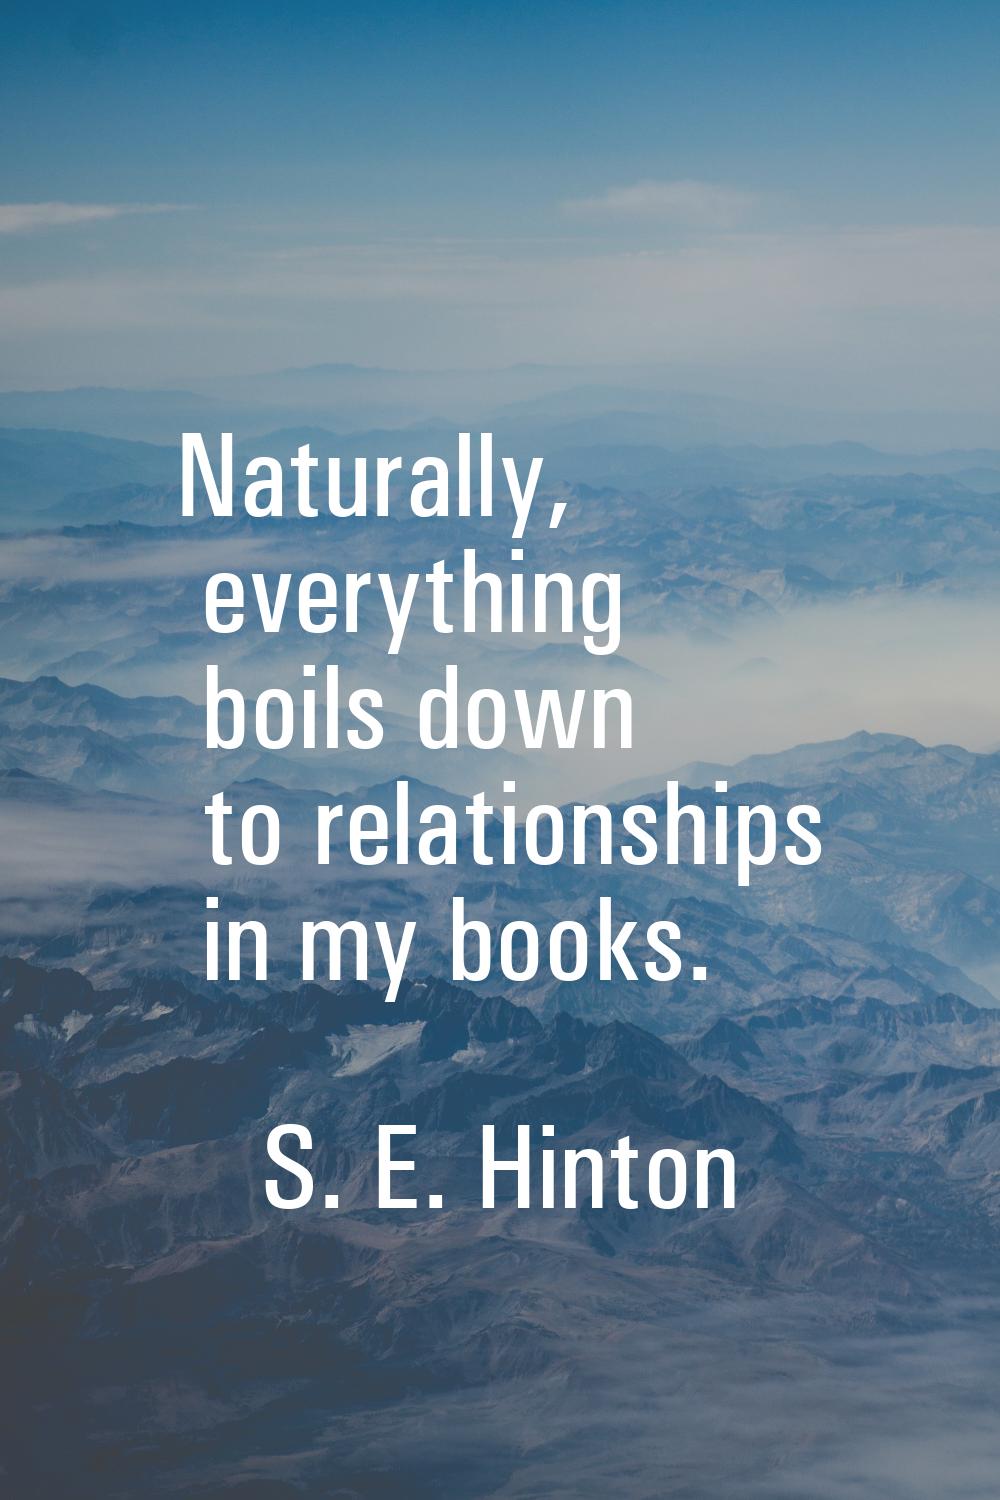 Naturally, everything boils down to relationships in my books.